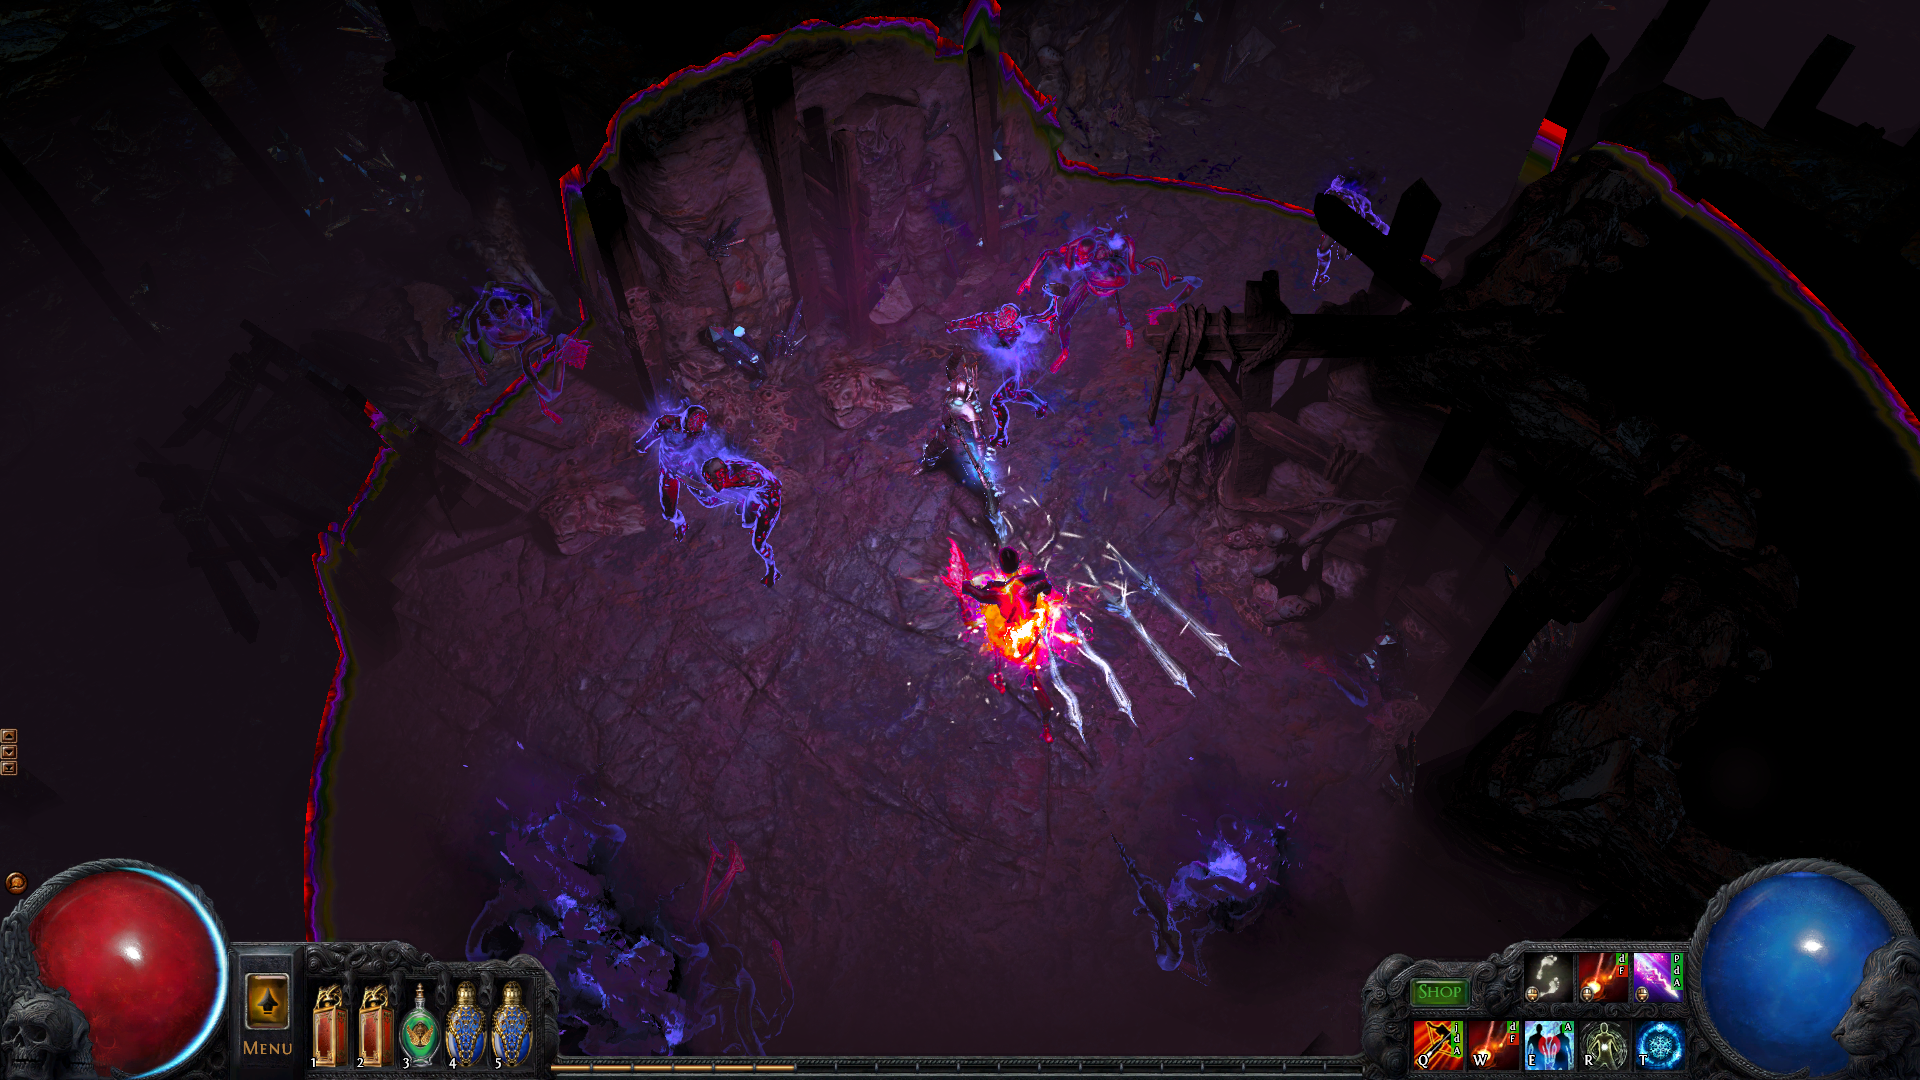 Breaches are coming to Path of Exile in Content Update 2.5.0